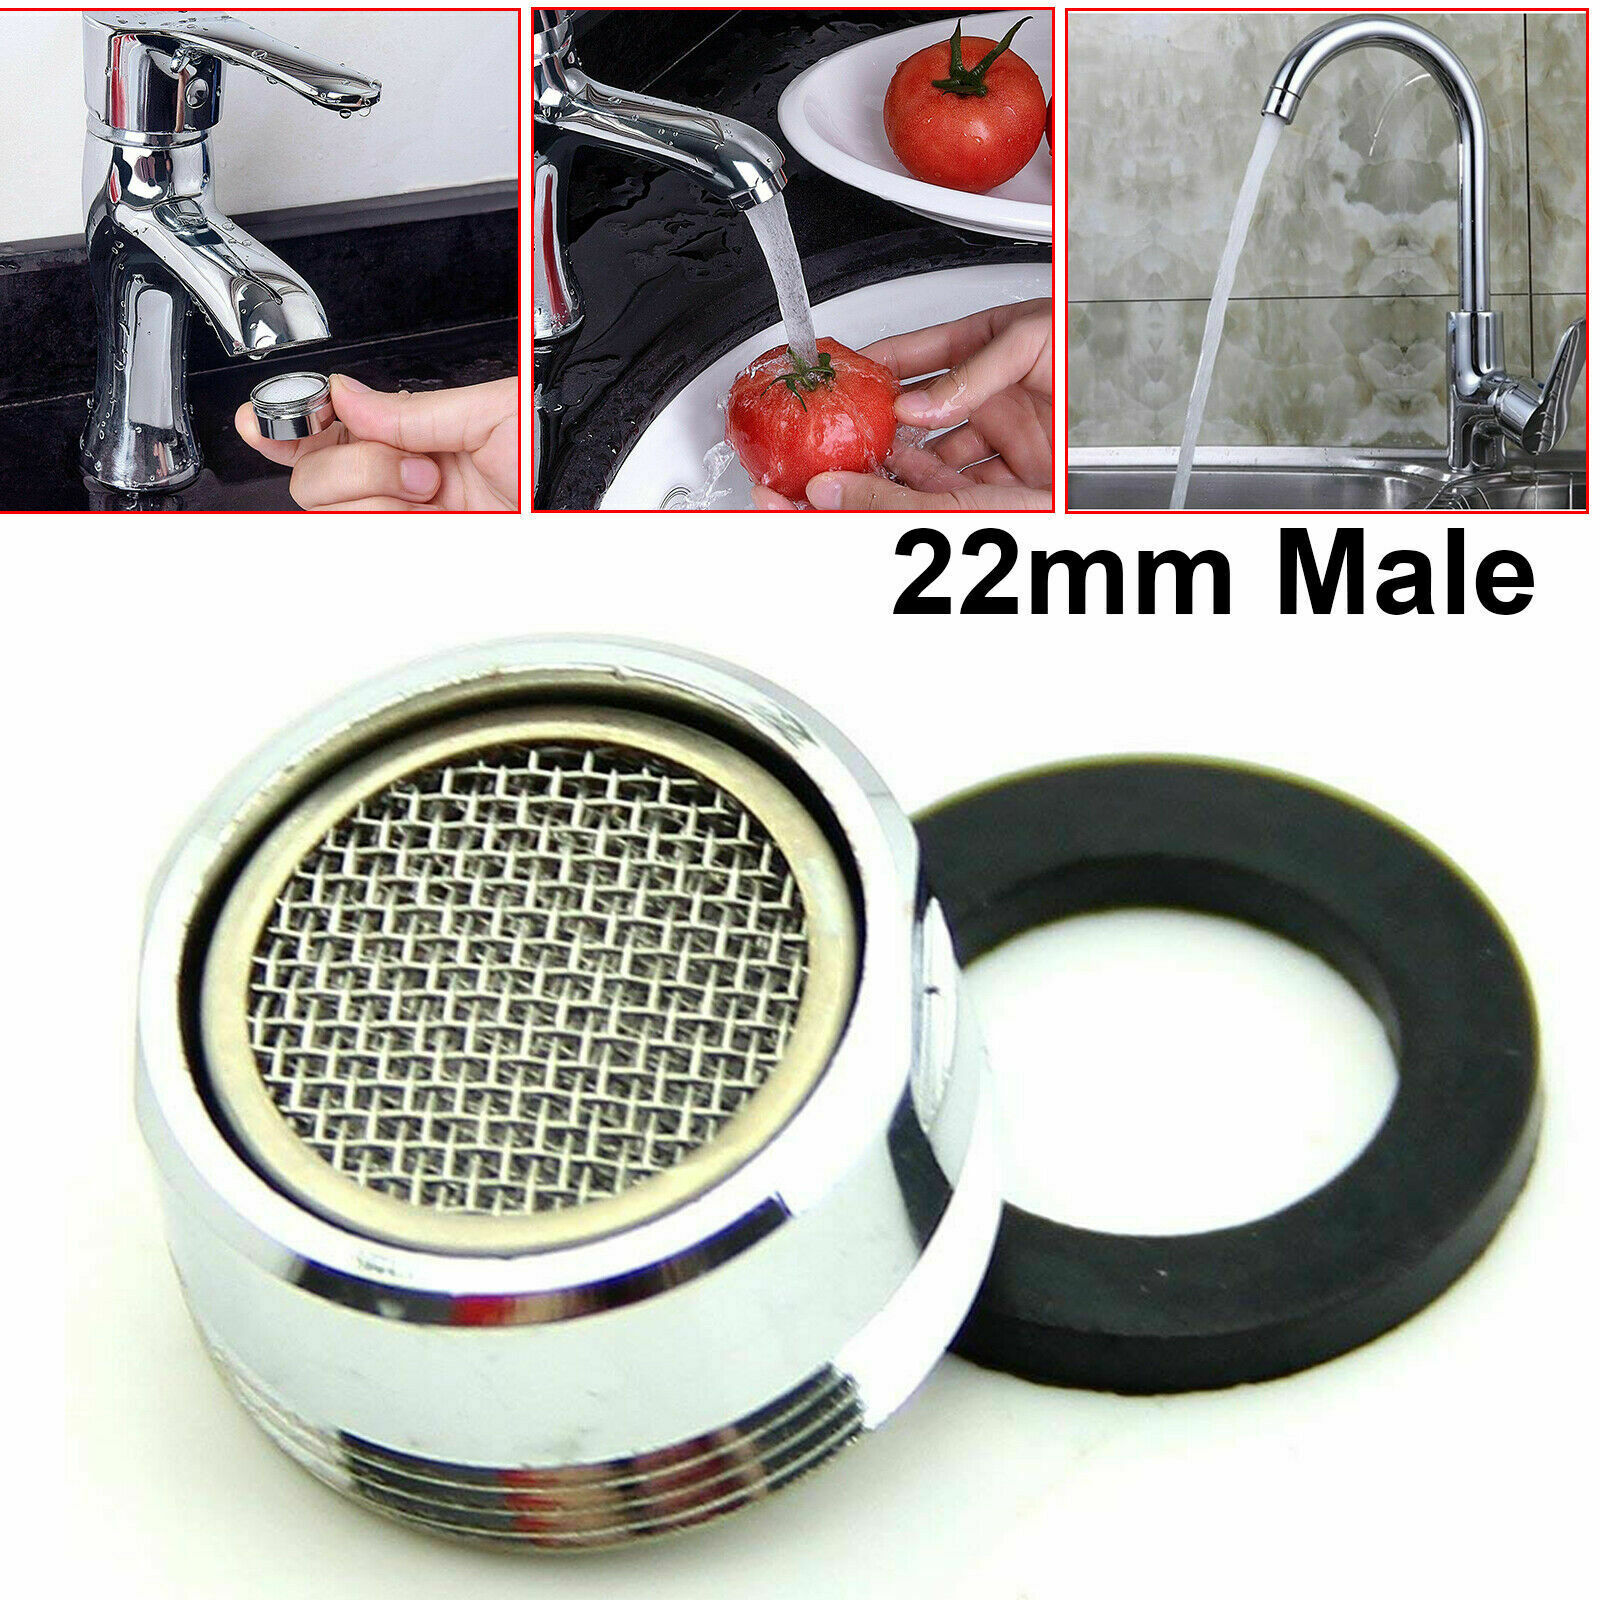 22Mm Male Tap Aerator Water Saving Faucet Nozzle Spout End Diffuser Filter